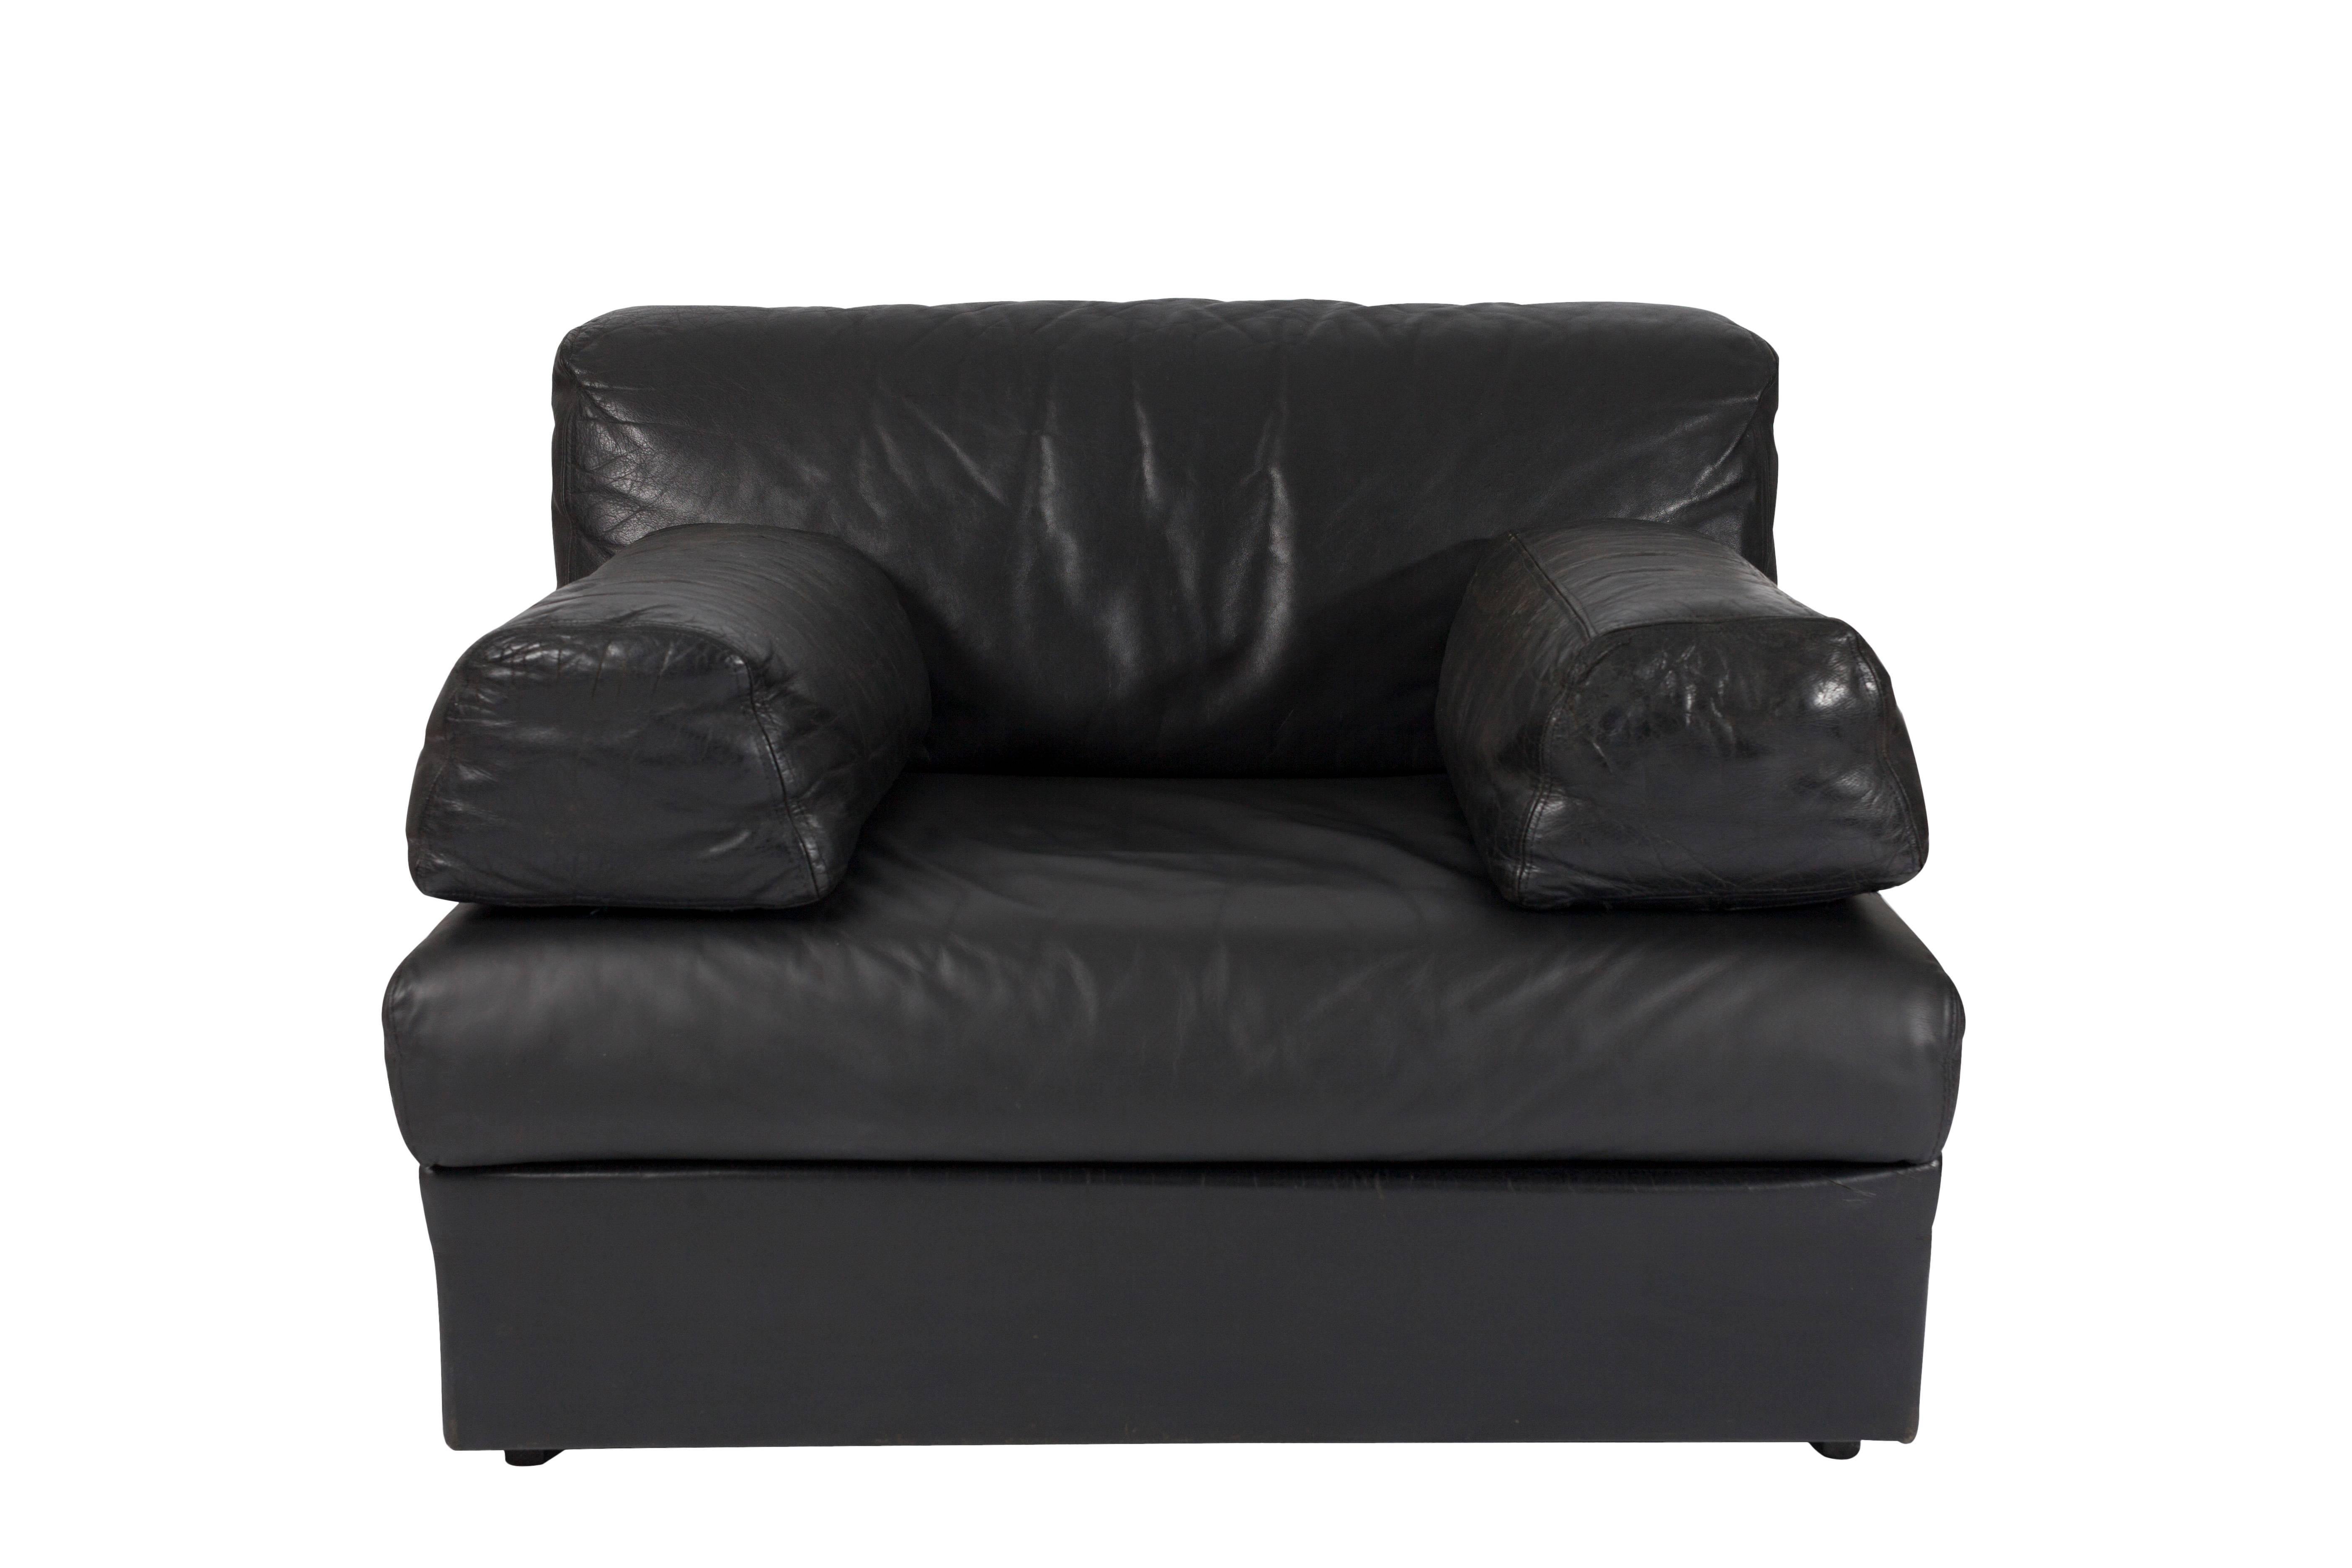 Dutch Black Leather Sectional Sofa in the Style of De Sede